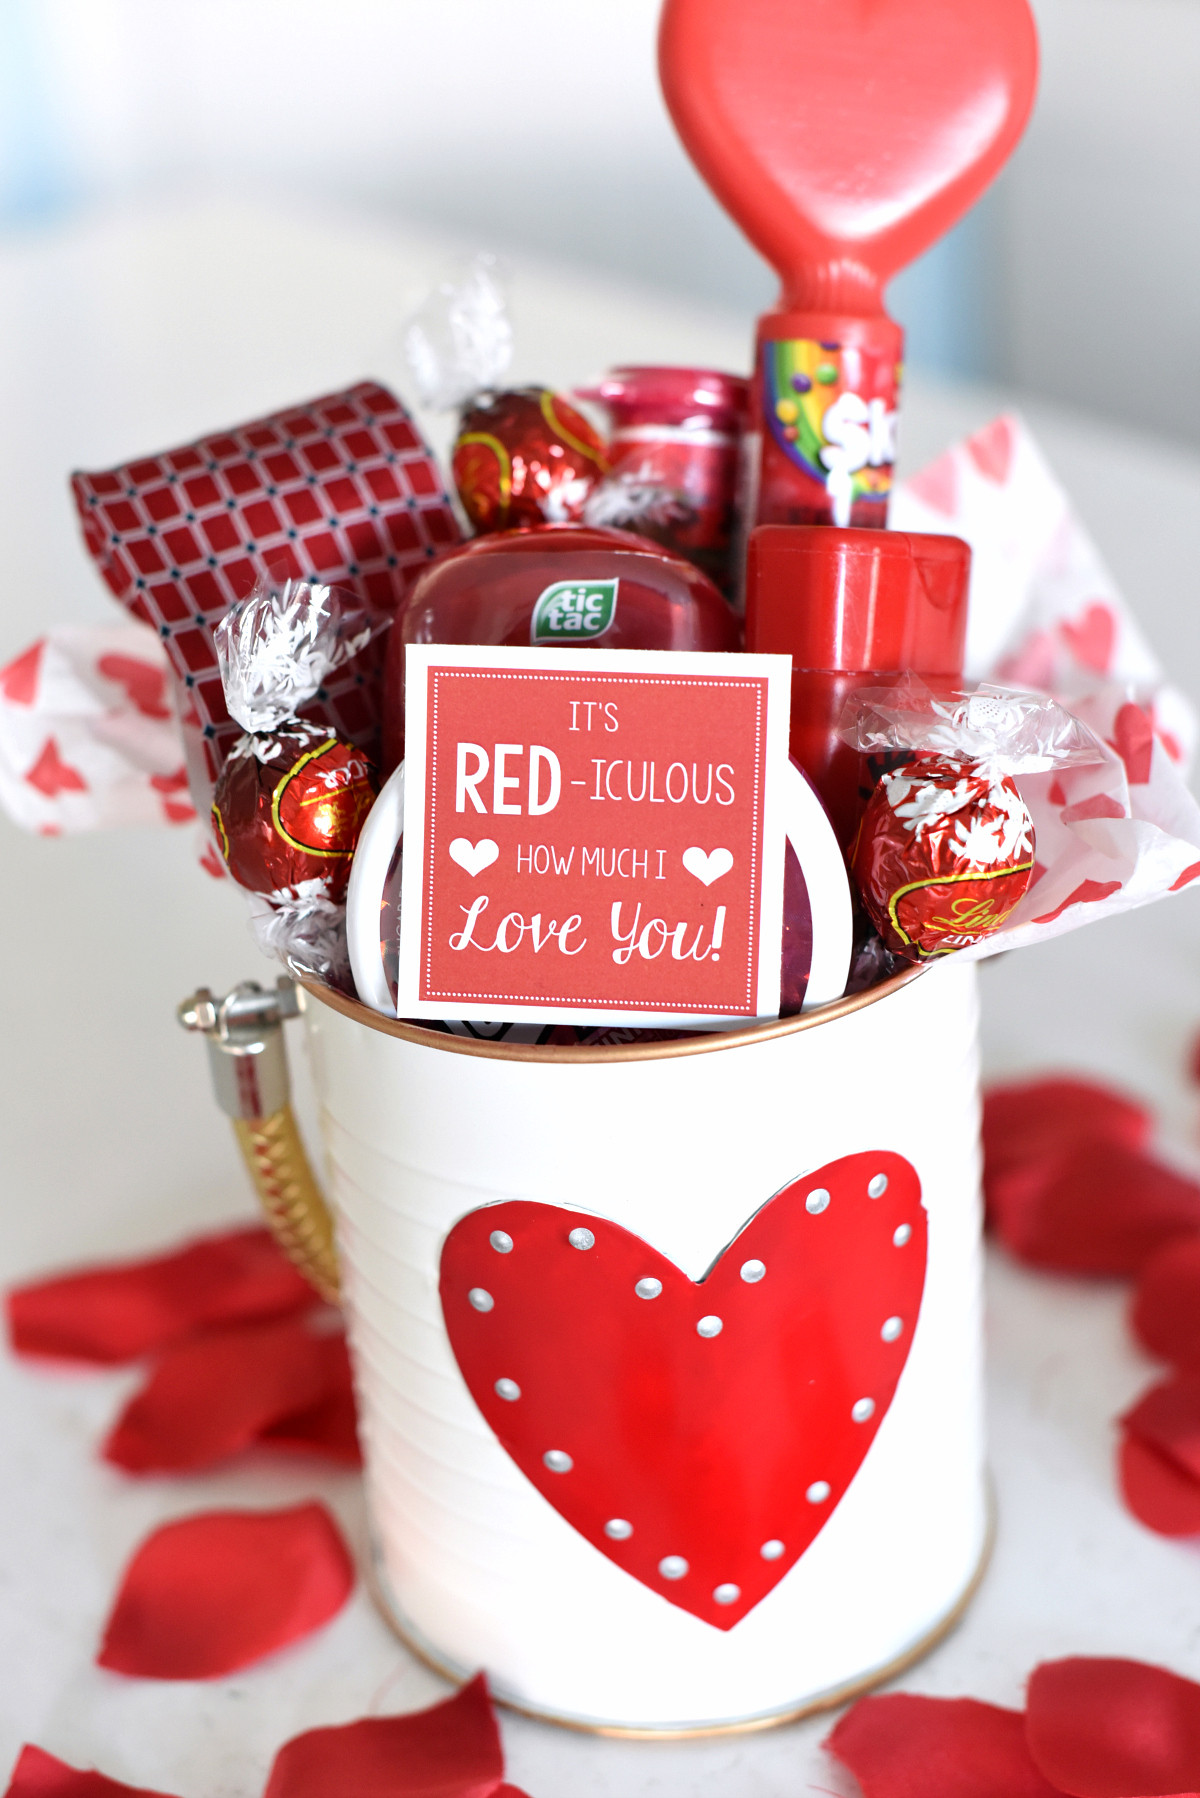 Unconventional Valentines Gift Ideas
 Cute Valentine s Day Gift Idea RED iculous Basket